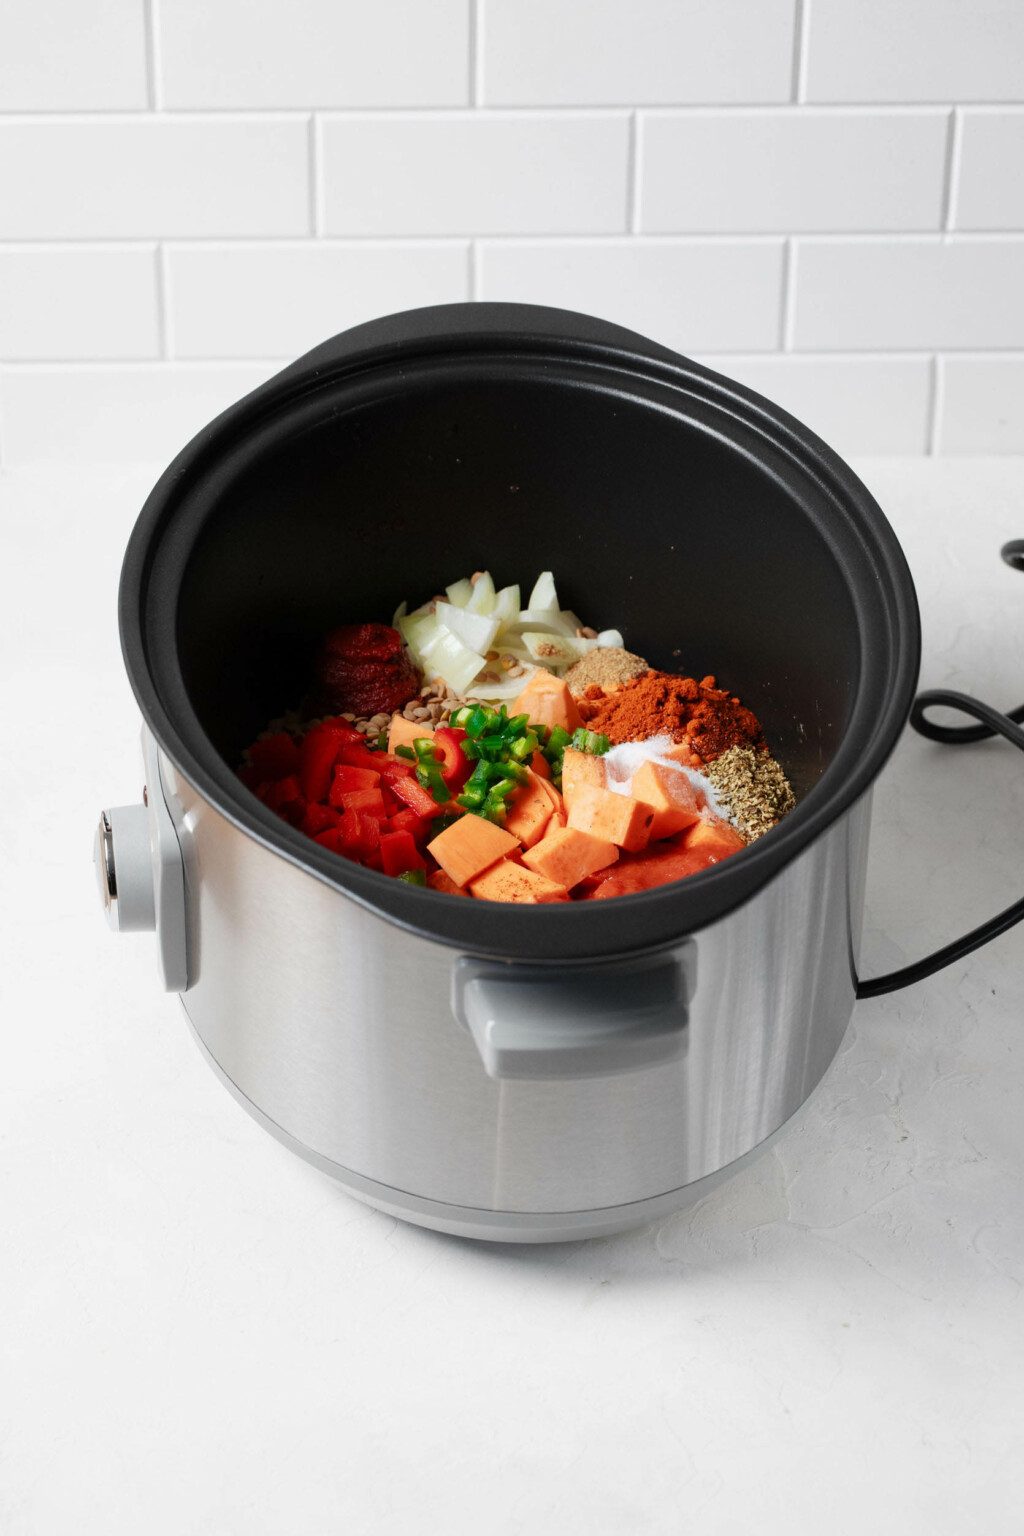 A silver slow cooker is filled with vegetables and lentils for making a batch of chili.